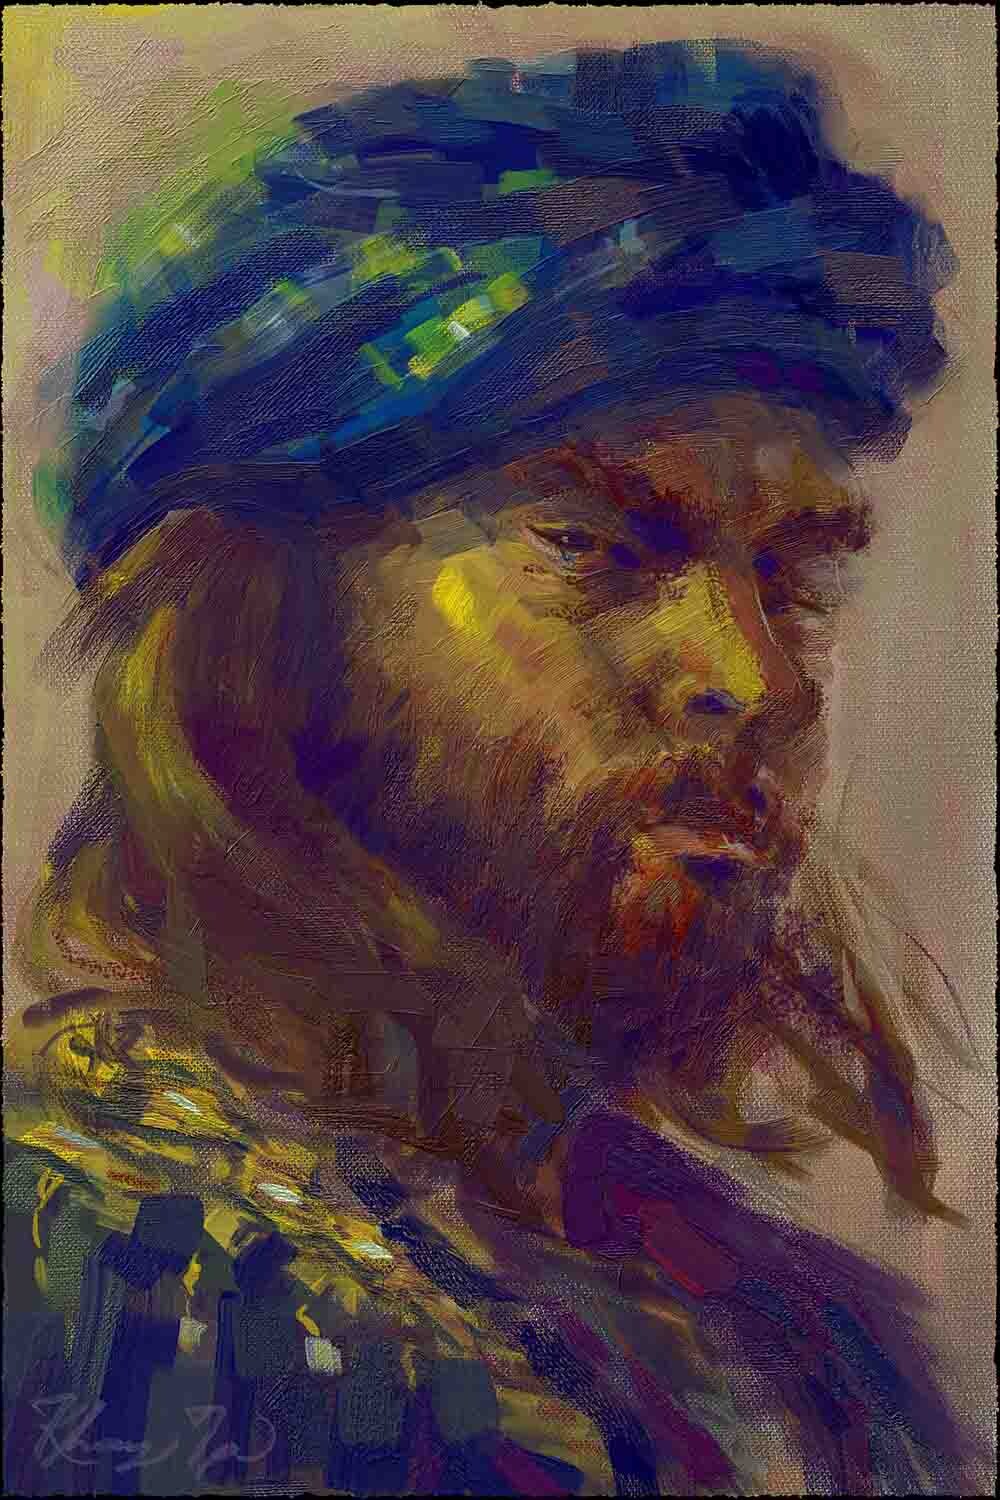 Painted with Oils in Rebelle 5 Pro